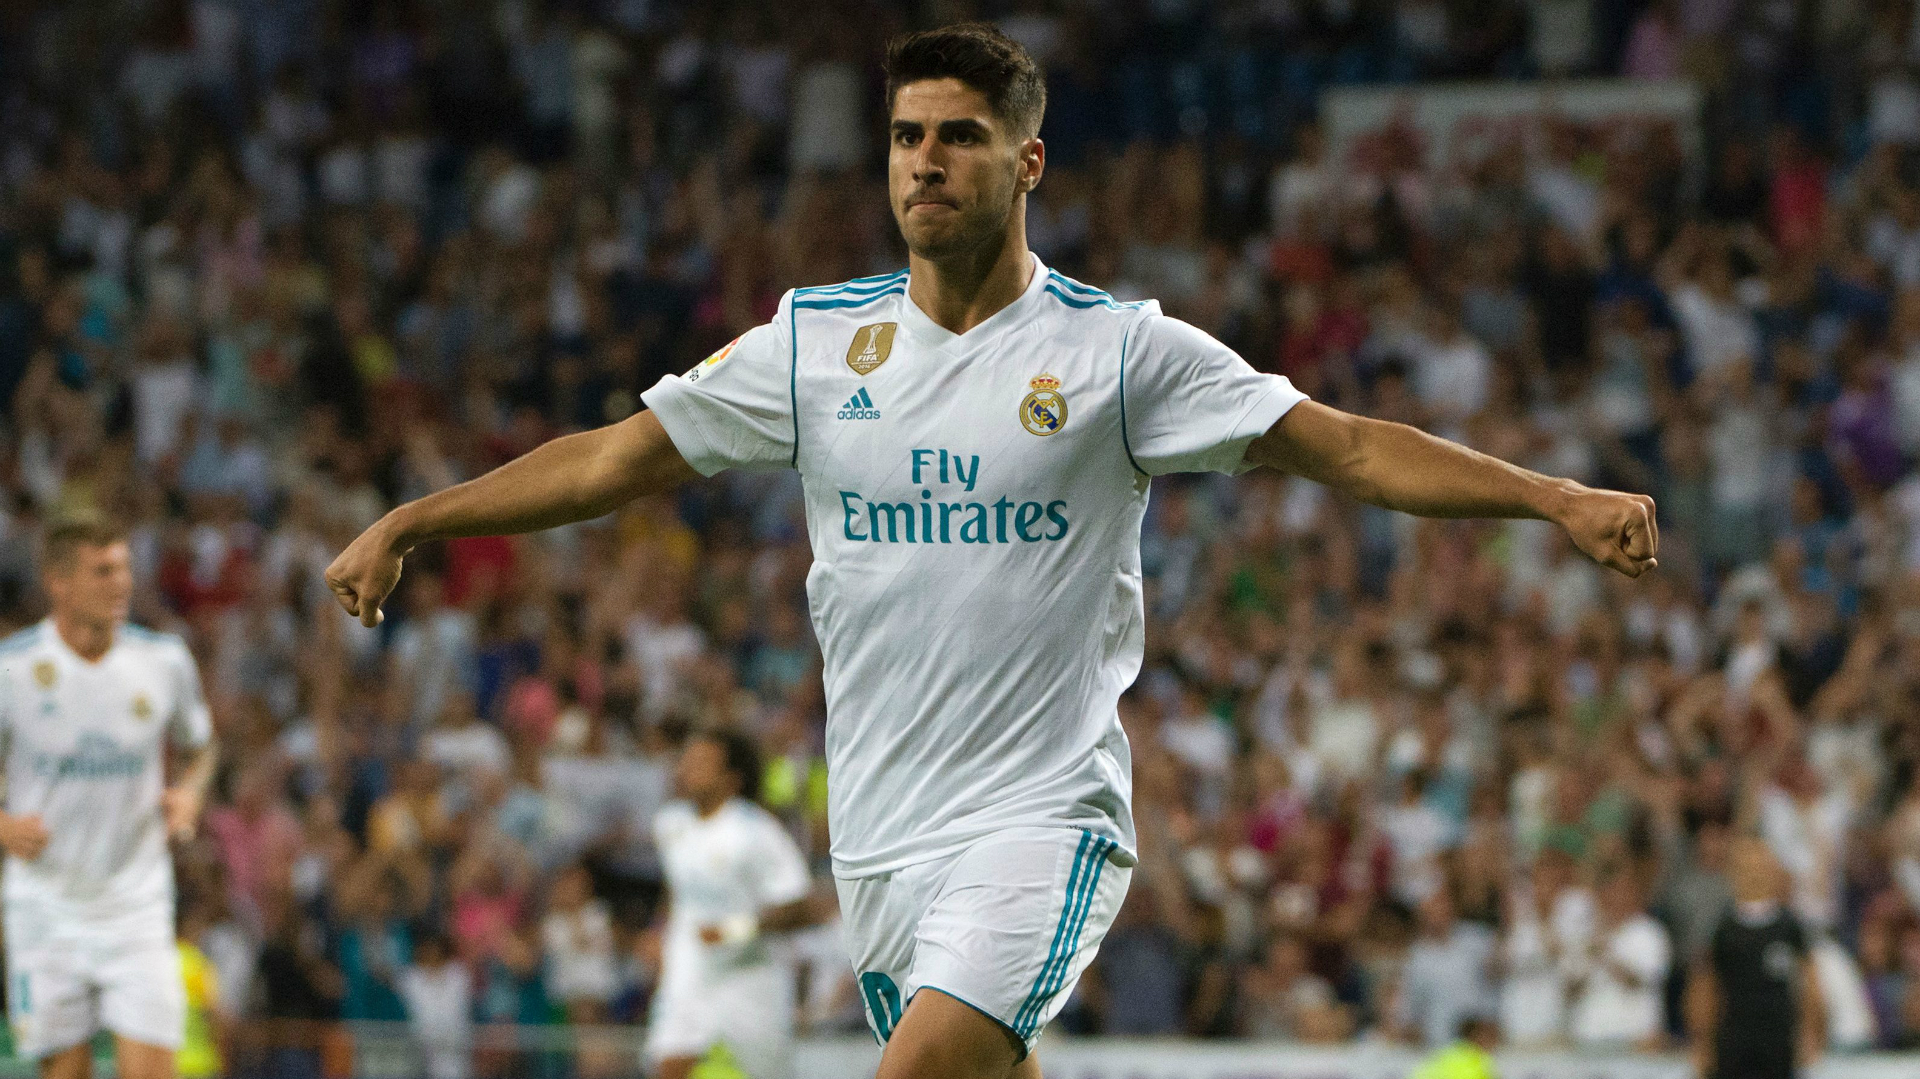 Real Madrid forward Marco Asensio considered an option for £25 million transfer by Manchester United.